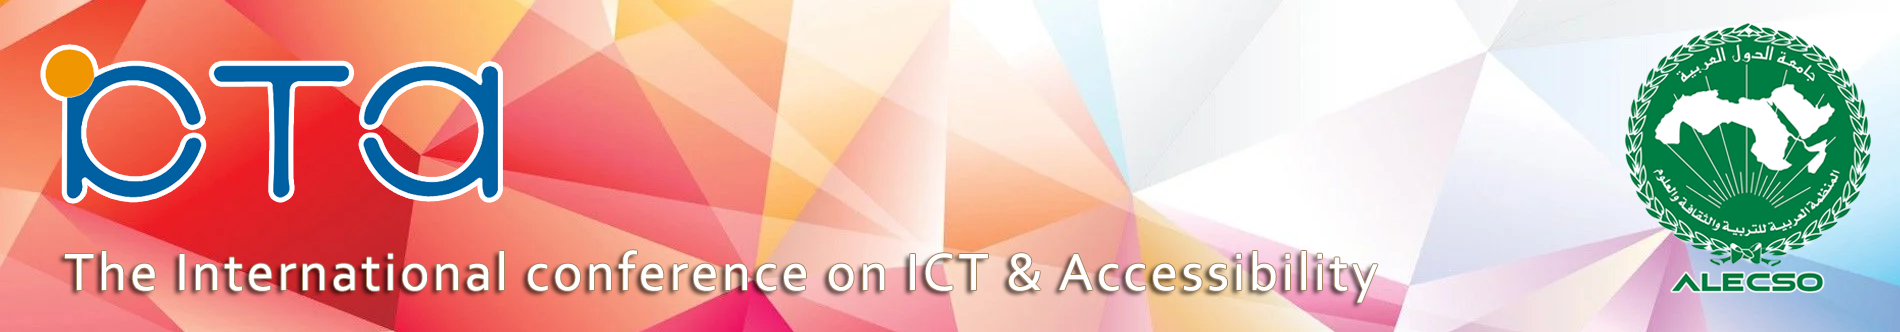 The 9th International conference on ICT & Accessibility